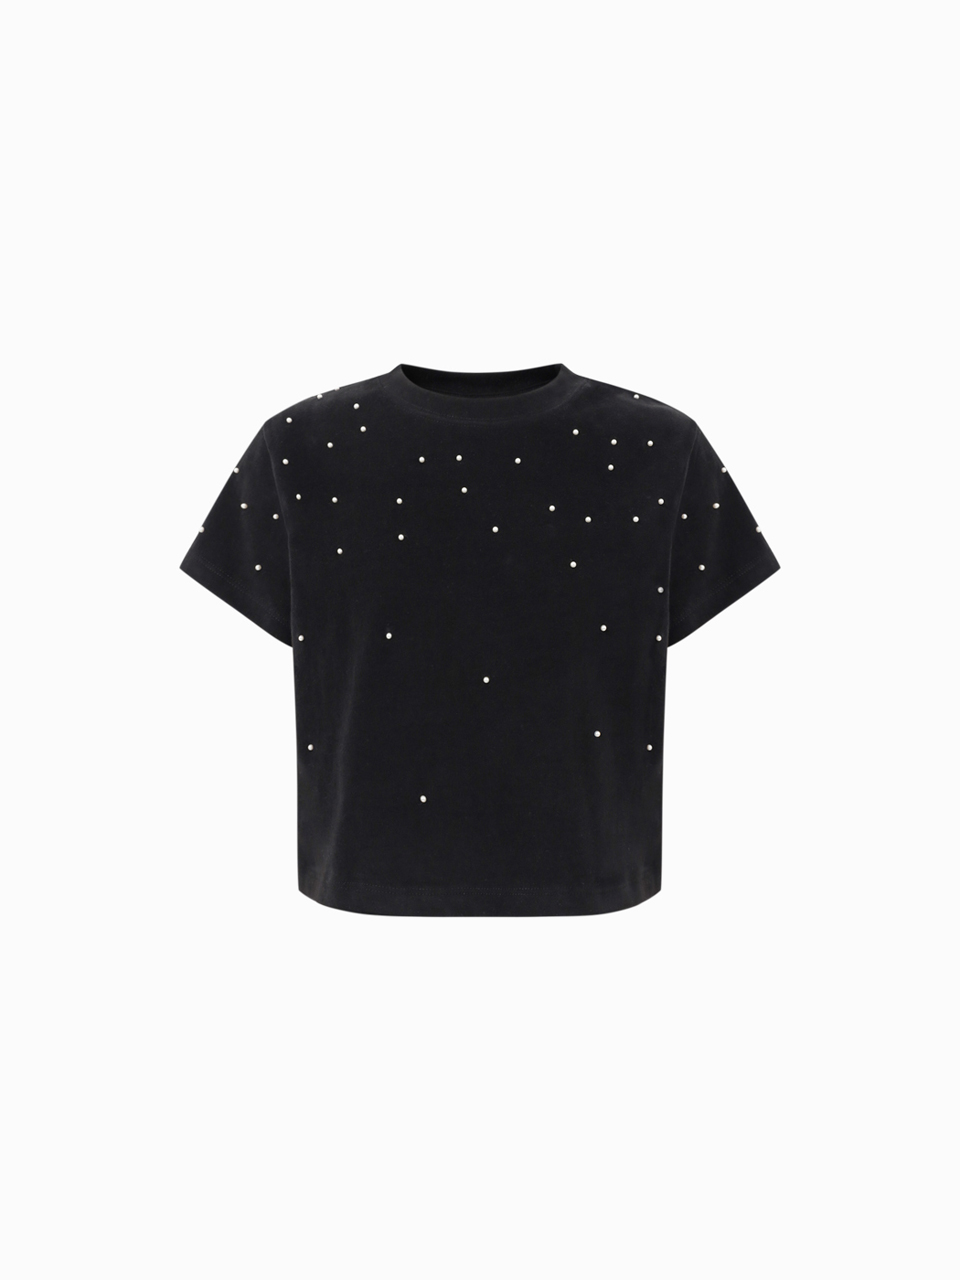 HACIE - PEARL BEADS CROPPED T-SHIRT [3COLORS]